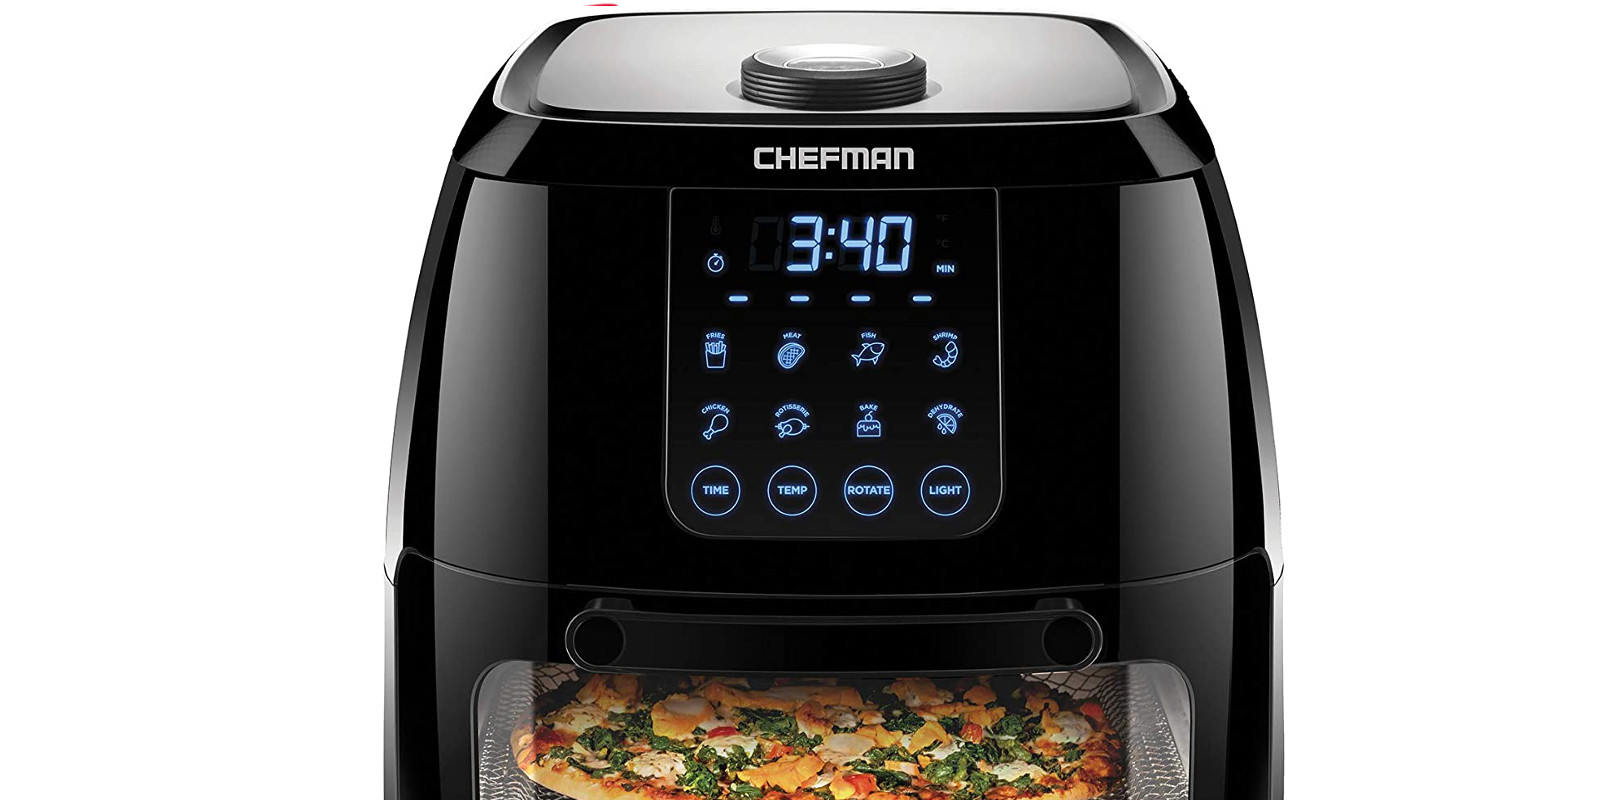 Chefman's 12-egg cooker now one of the most affordable out there